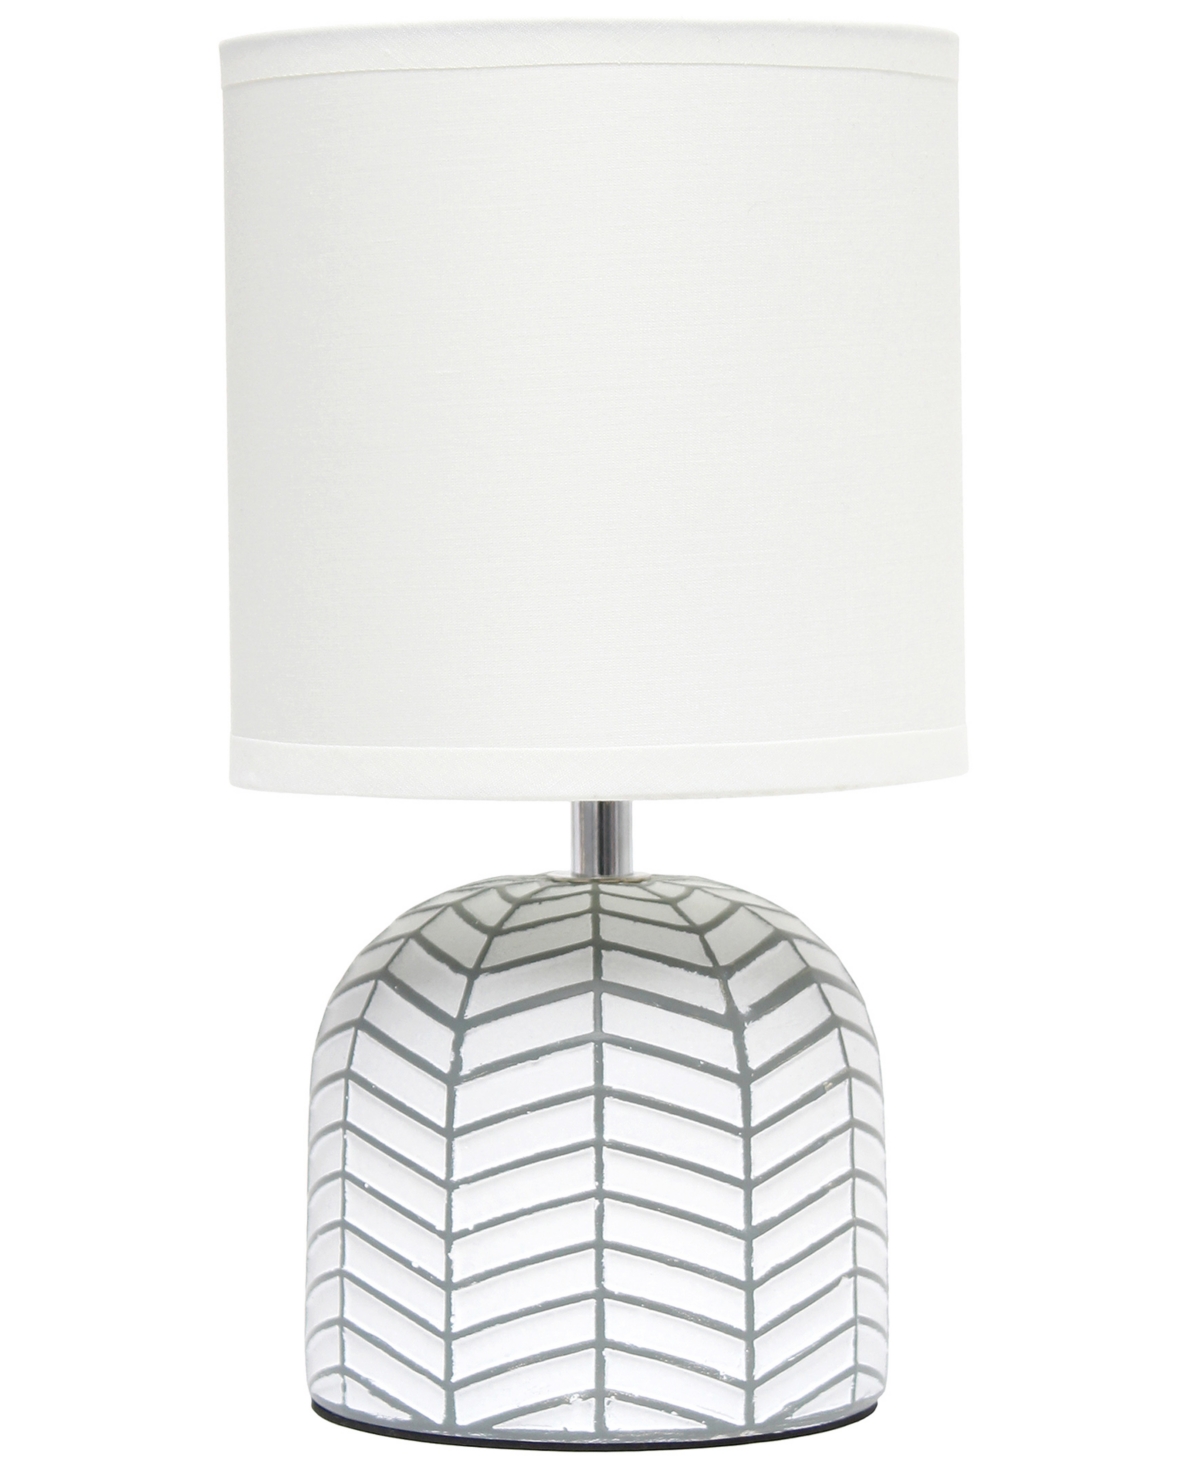 Shop Simple Designs 10.43" Petite Contemporary Webbed Waves Base Bedside Table Desk Lamp With White Fabric Drum Shade